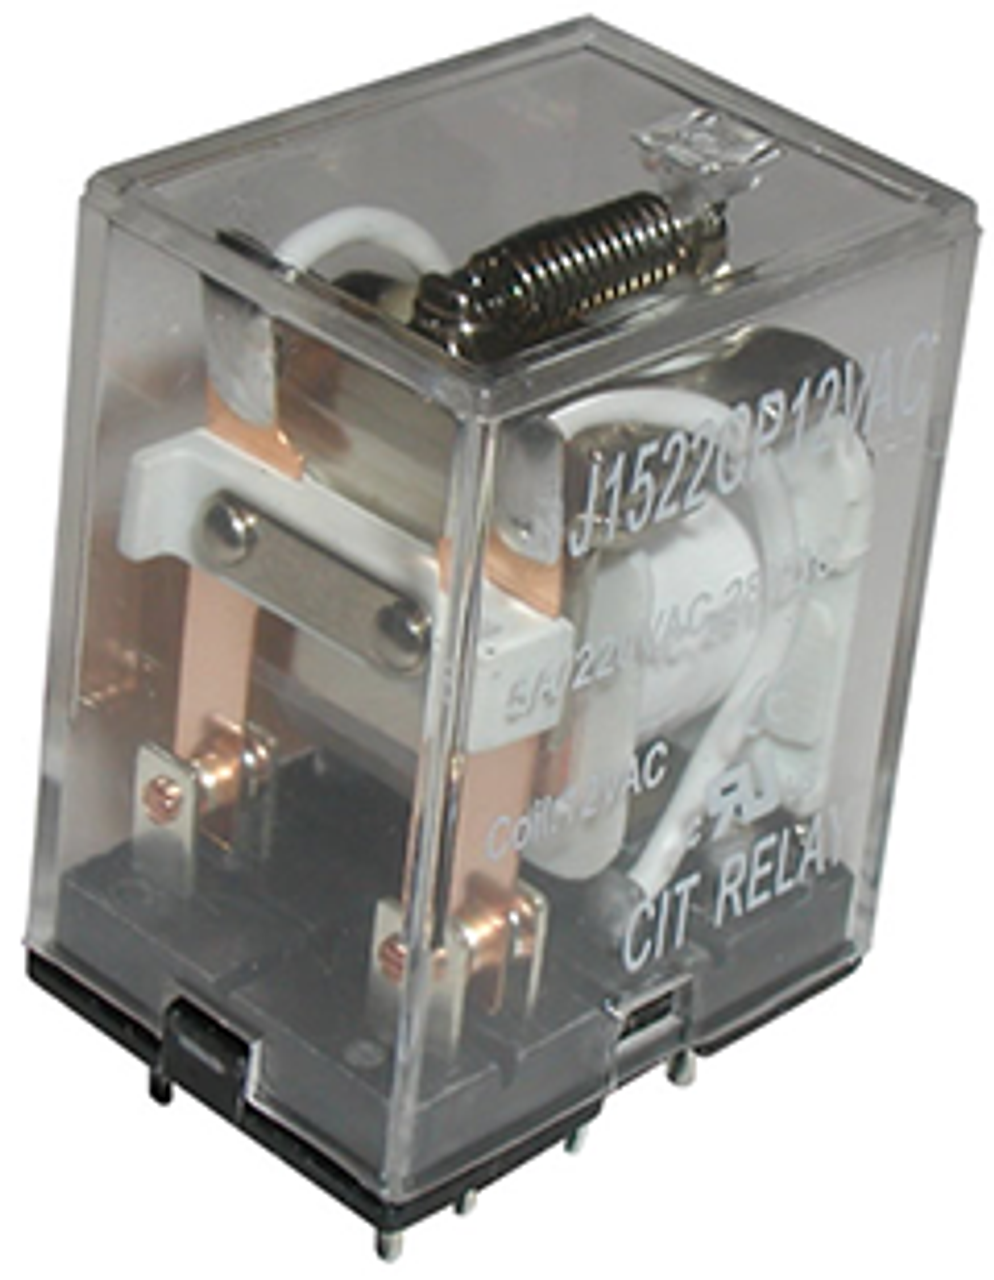 CIT Relay and Switch J1522CP12VACD Industrial Relays